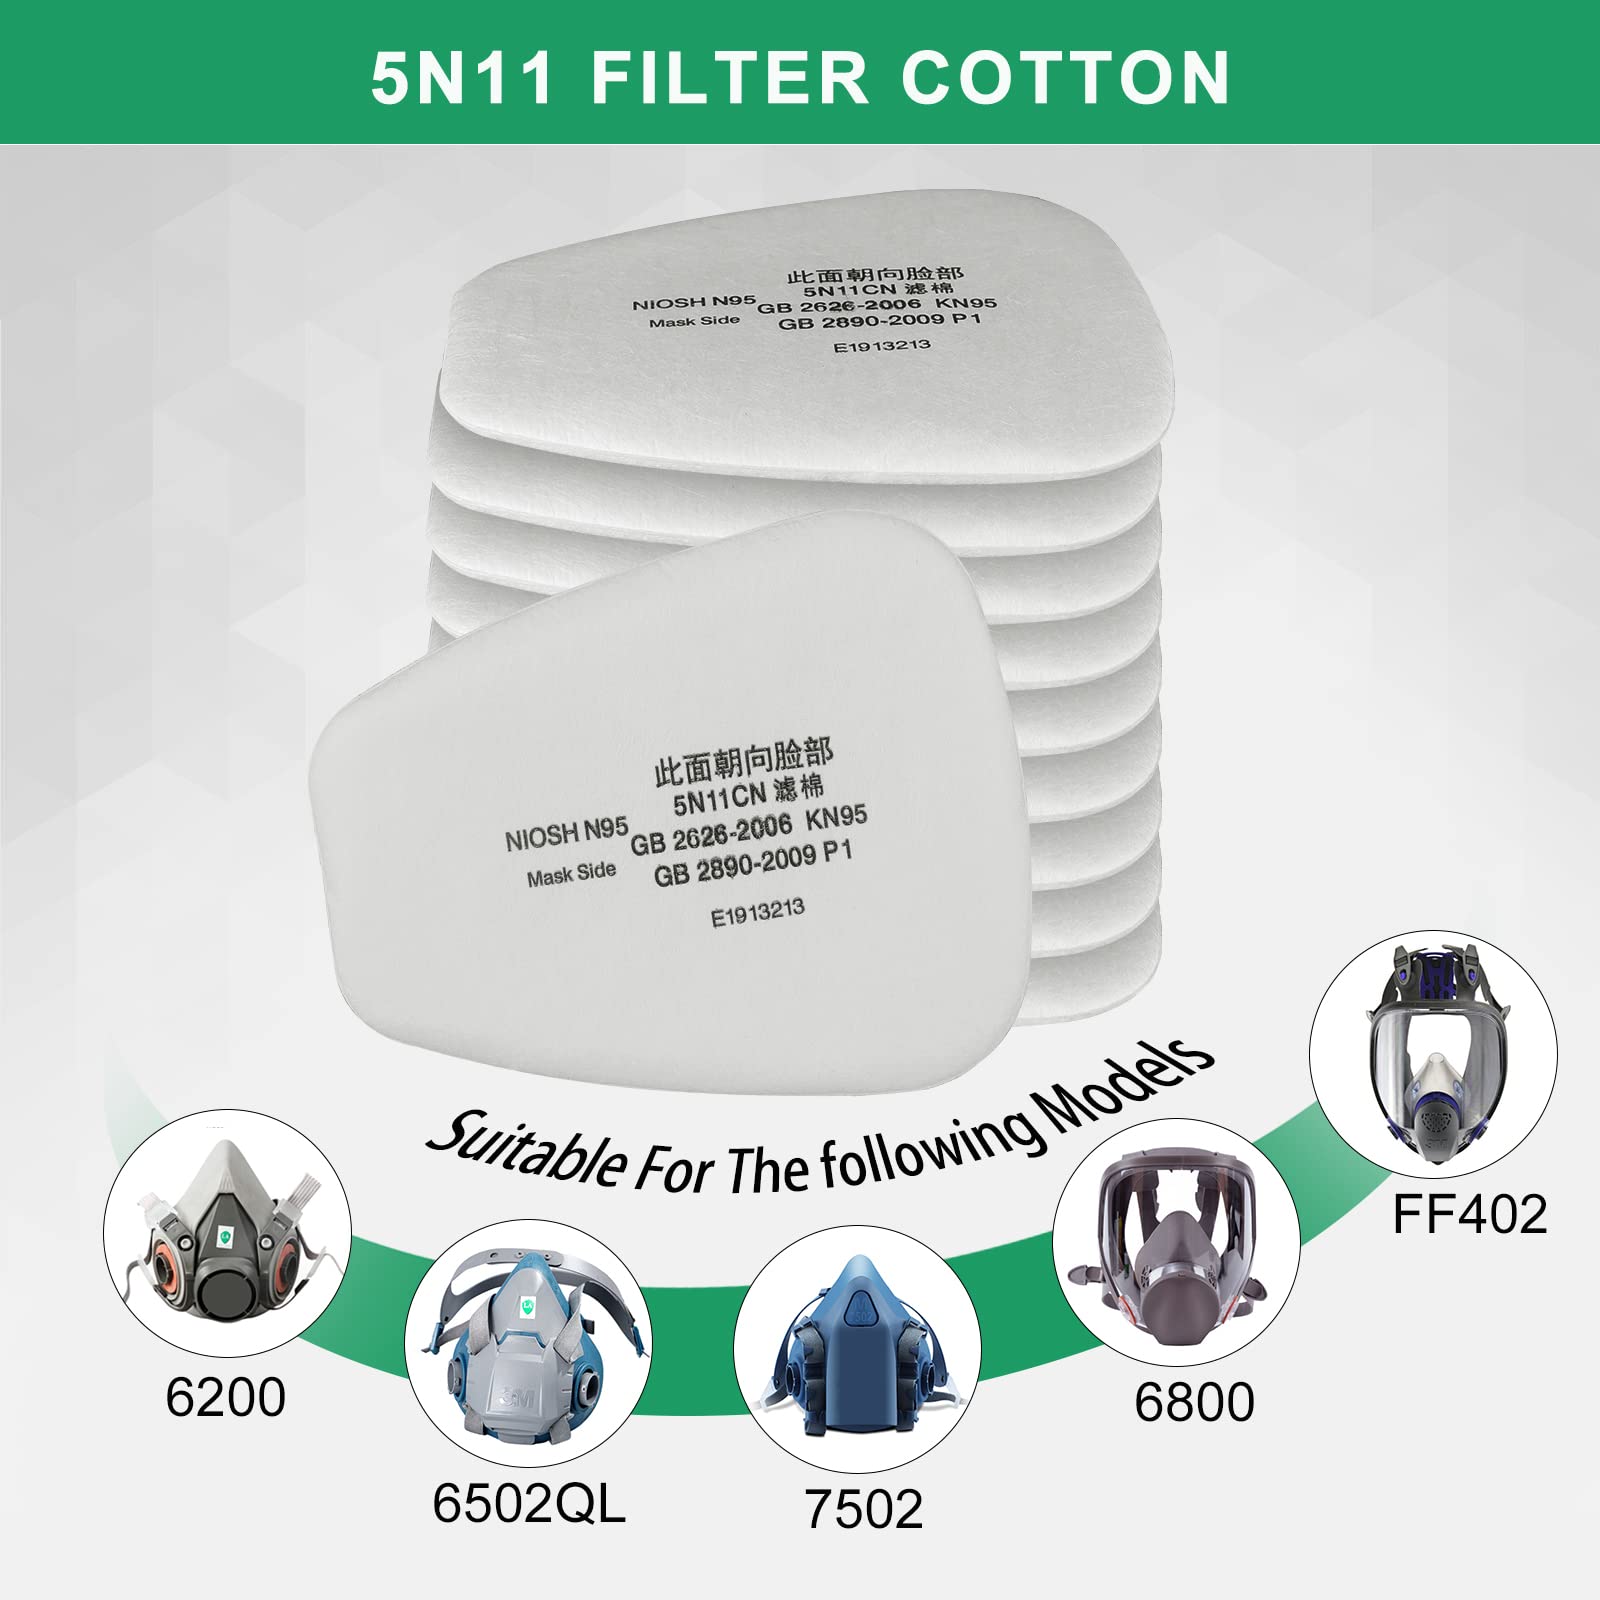 30PCS Filter Cotton of Respirator - Spray Paint Dust-proof Anti-particles For 6200, 6800, 7502 Series Gas Respirator (5N11)